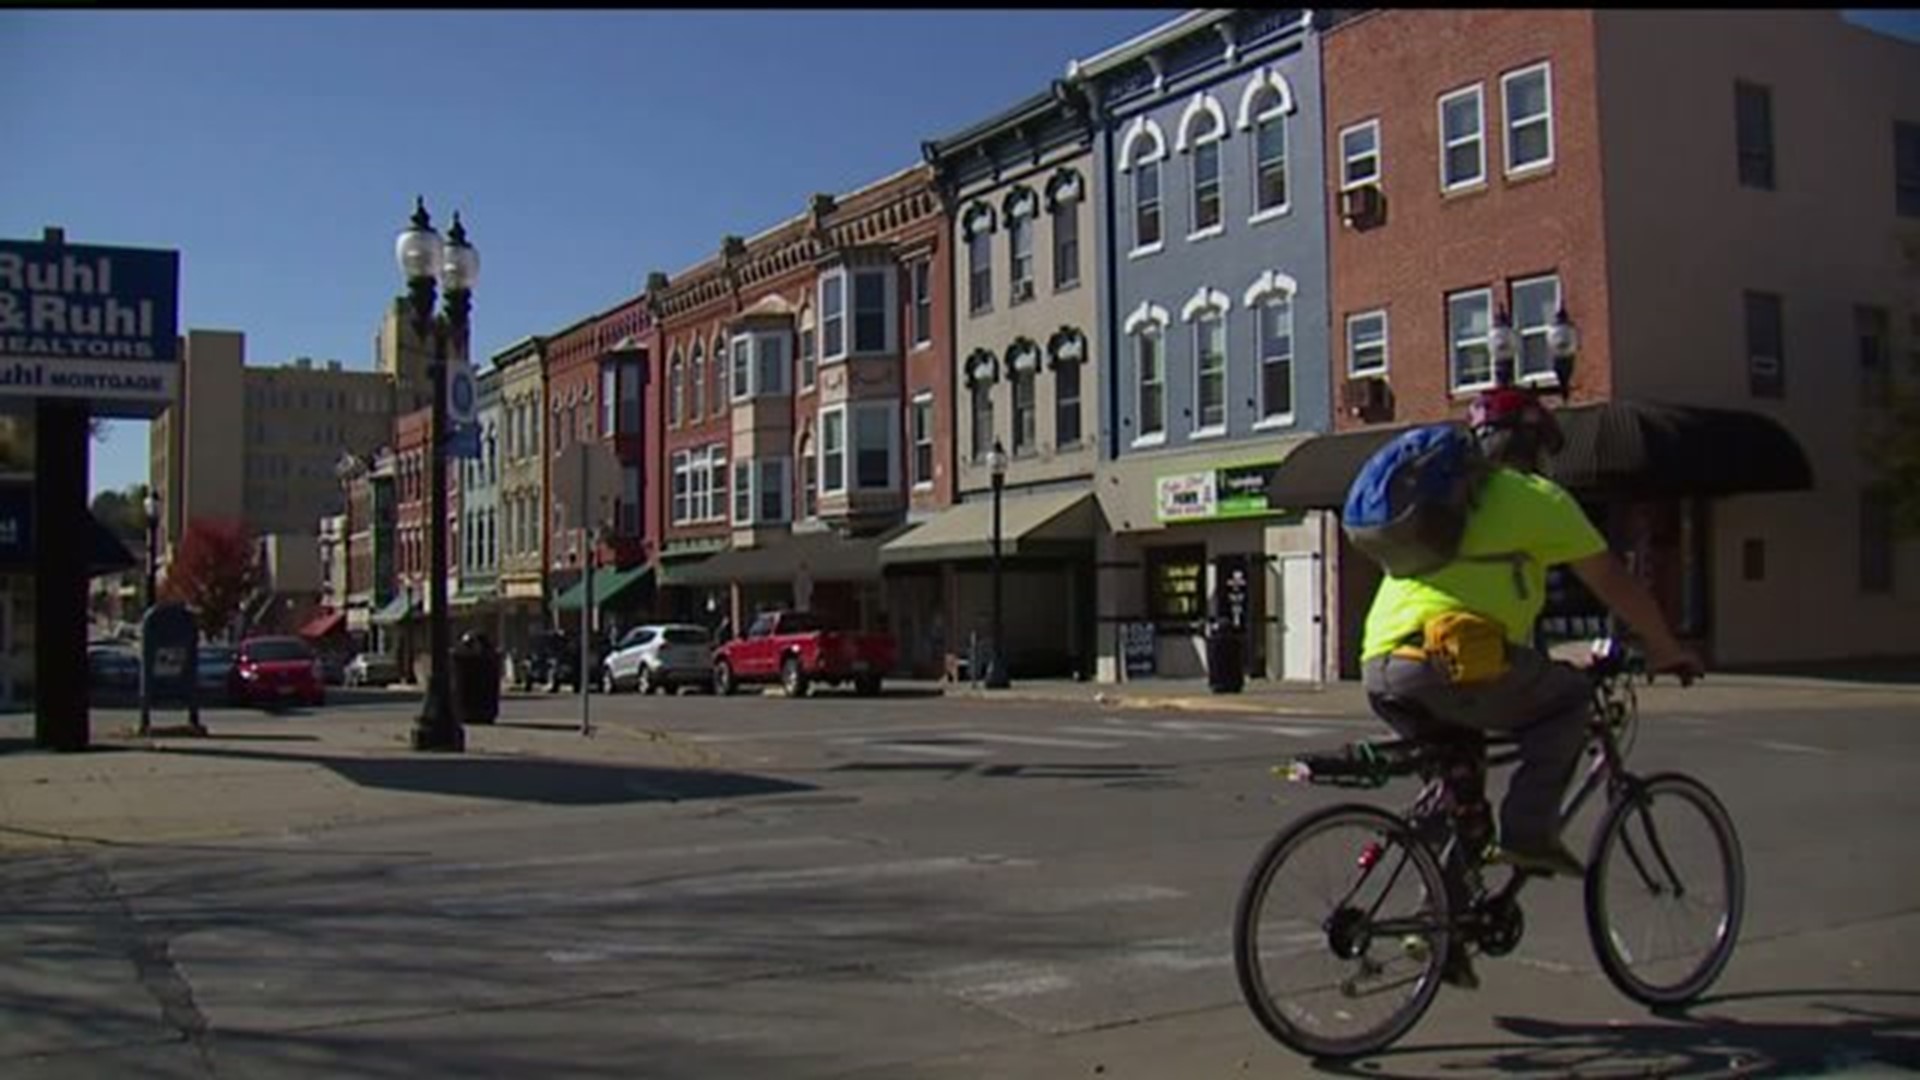 Downtown Muscatine settles in to two-way traffic